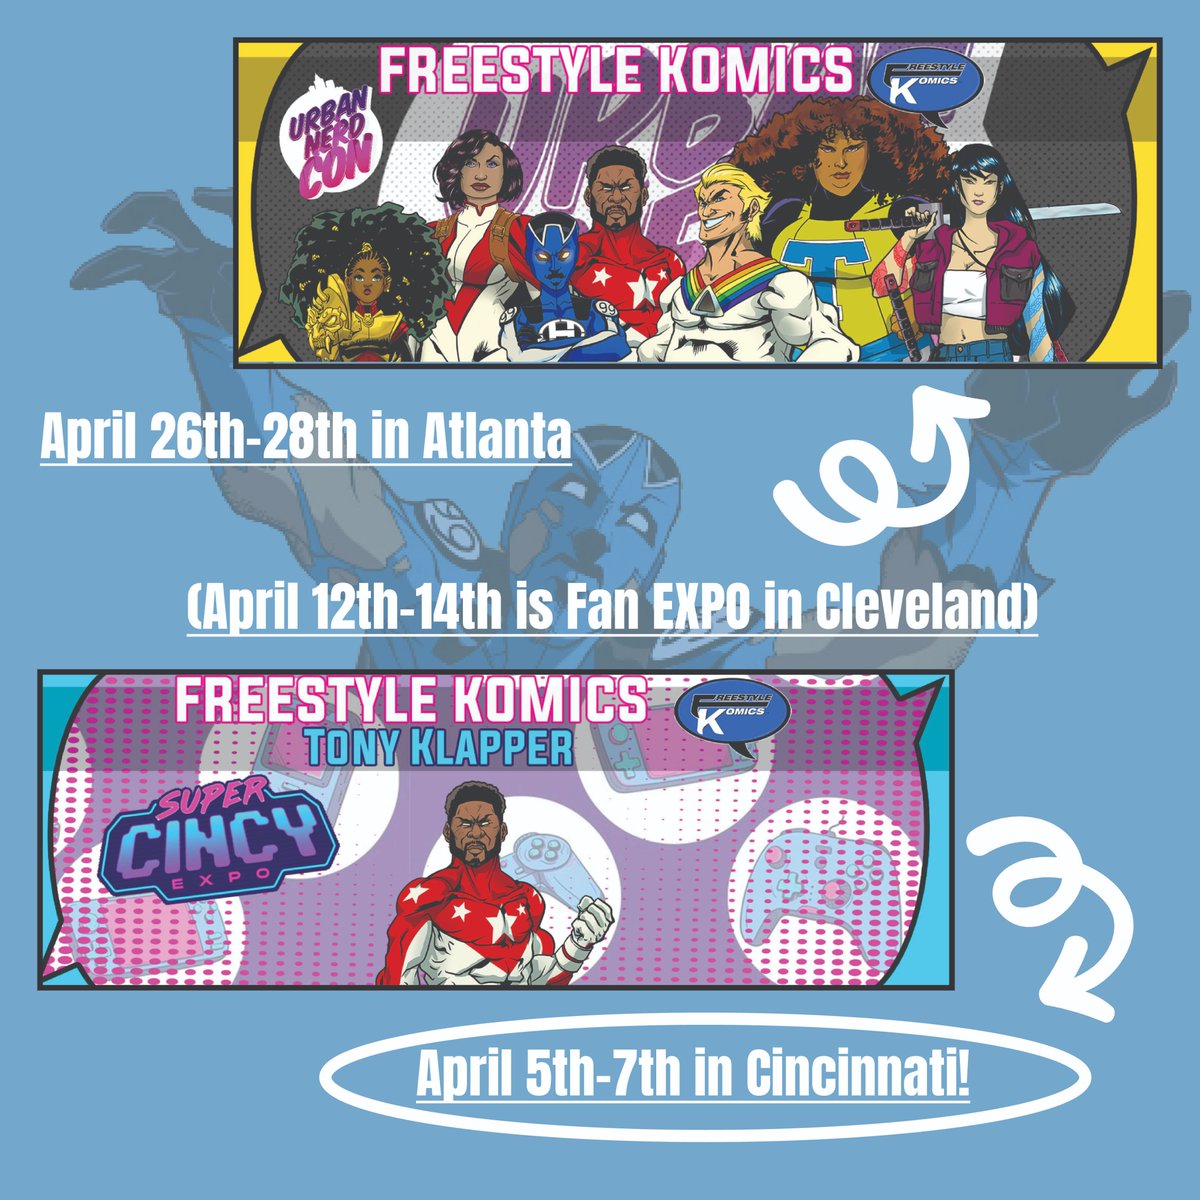 Are you coming to these events this weekend? Hope to see you there! #comic #igcomics #comicon #comiccollector #comicsforsale #comicbookartist #comico #comicsart #comicstyle #comics4sale #comicstrips #comicbookcollection #comicbooknerd #comicnerd #comicbookcollector #comicpage